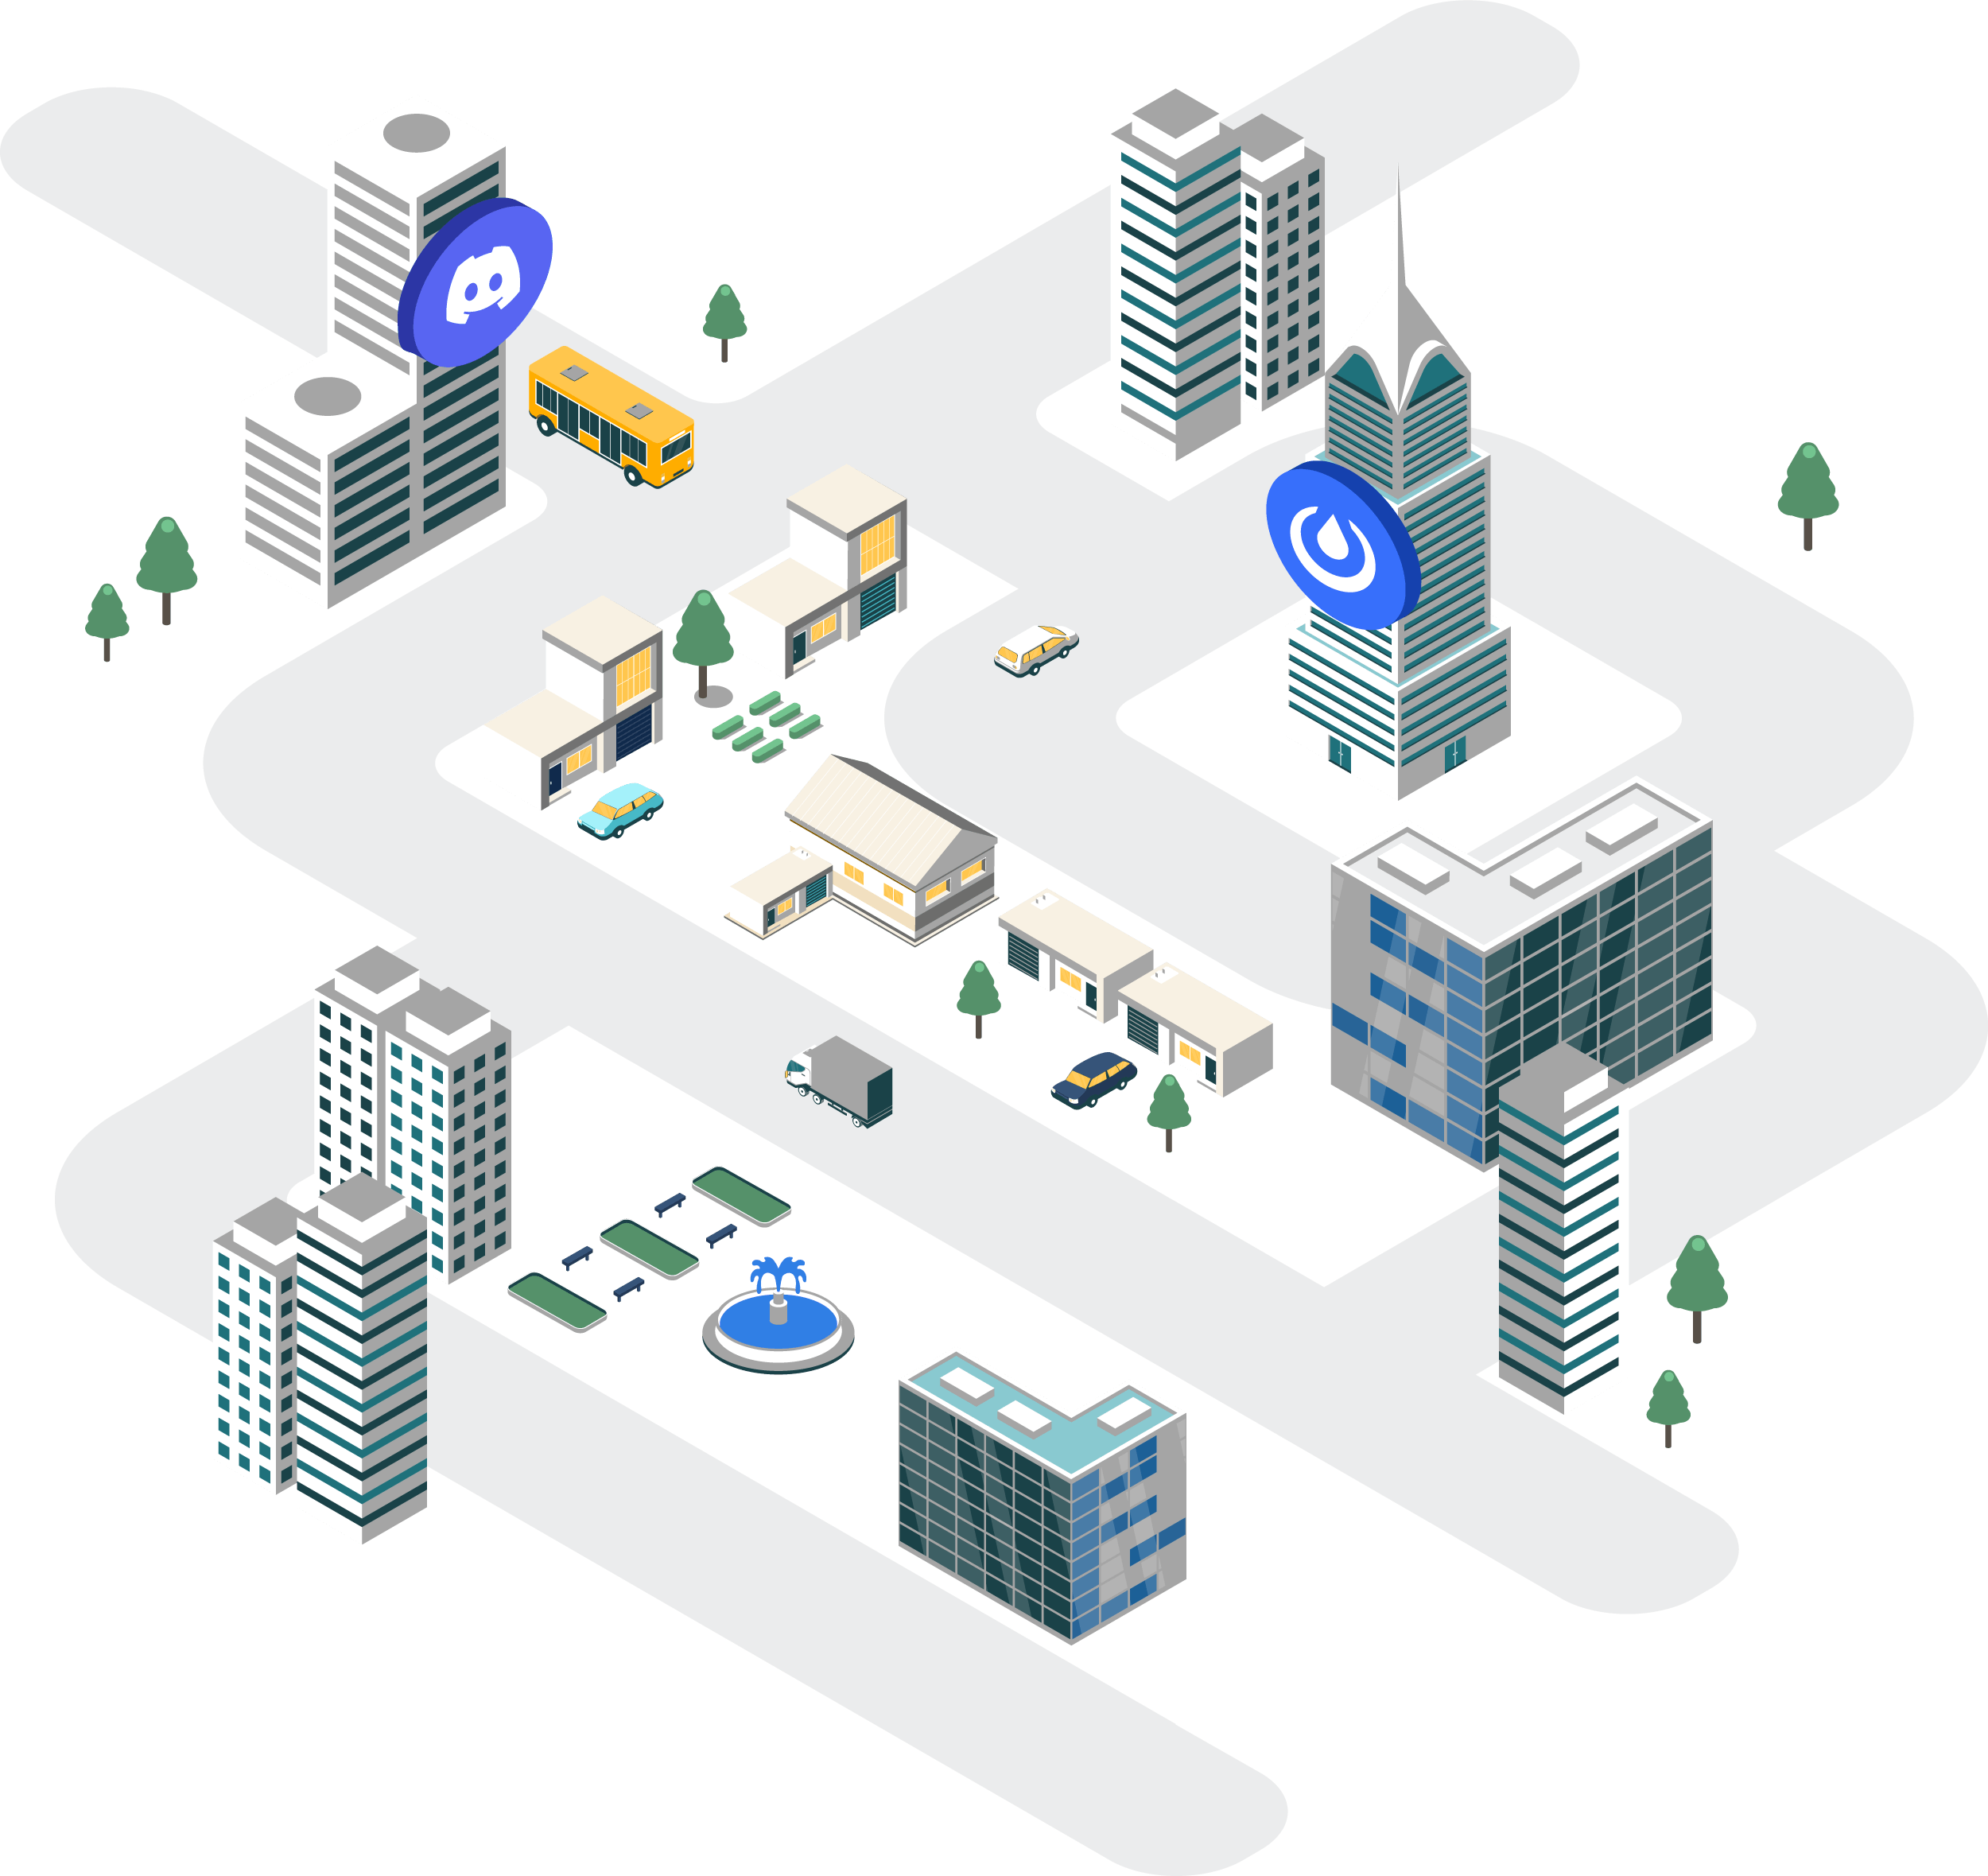 An isometric illustrated city with houses and buildings. One of the buildings features the Discord logo and another the Mattermost logo